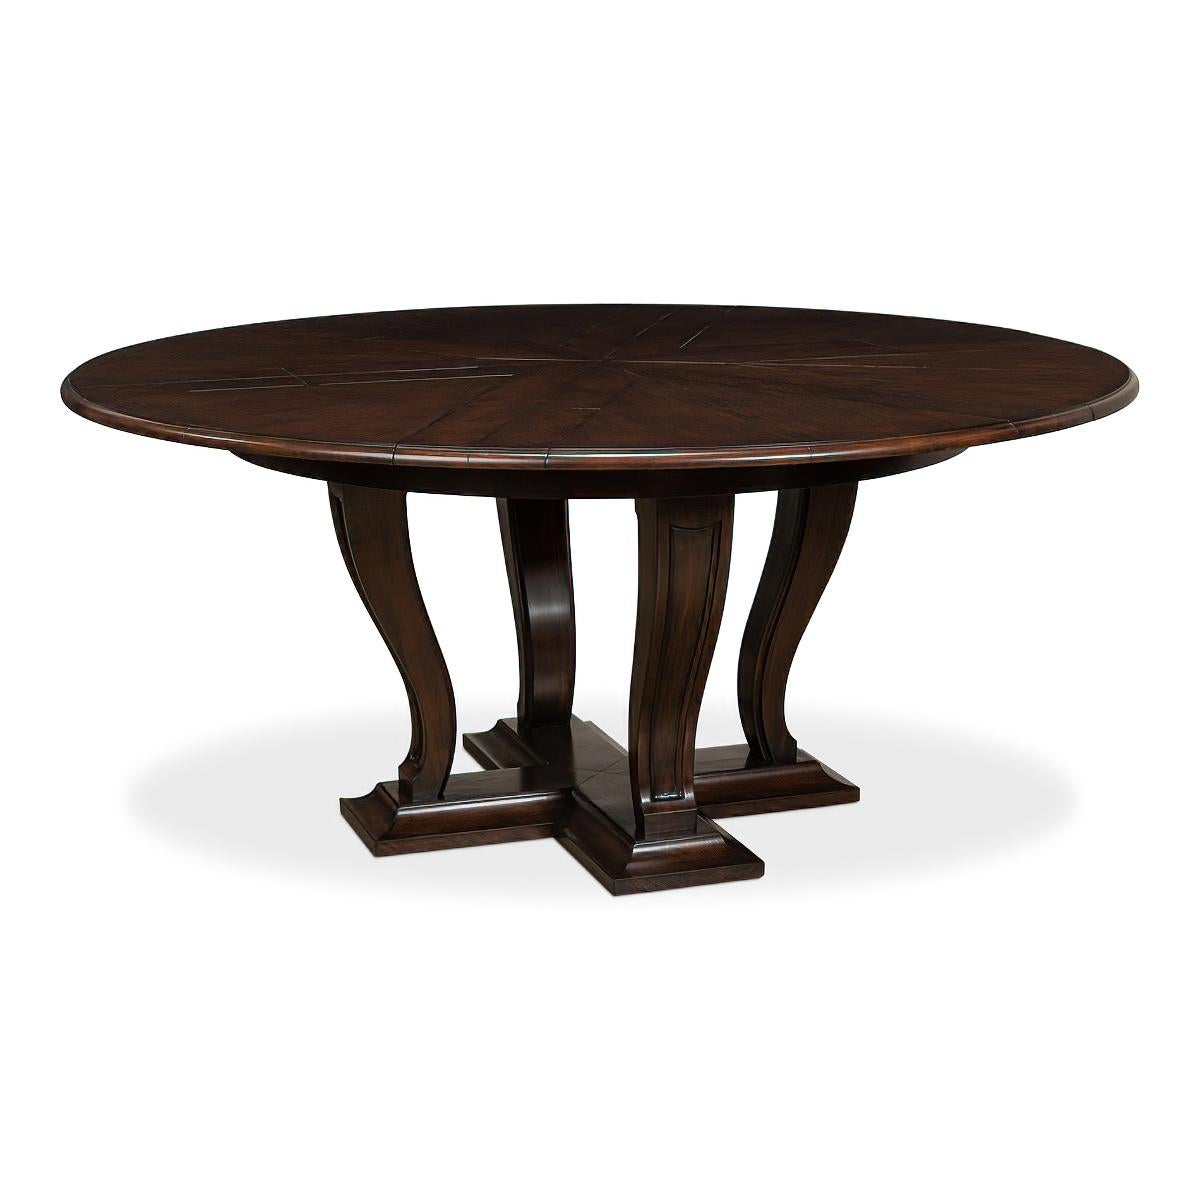 A 70-inch round Art Deco Style dining table on a transitional styled base consisting of tapered serpentine curved legs that have been carved with an inset panel design. They sit on a platform base that has been framed with a bold cove shape. The top